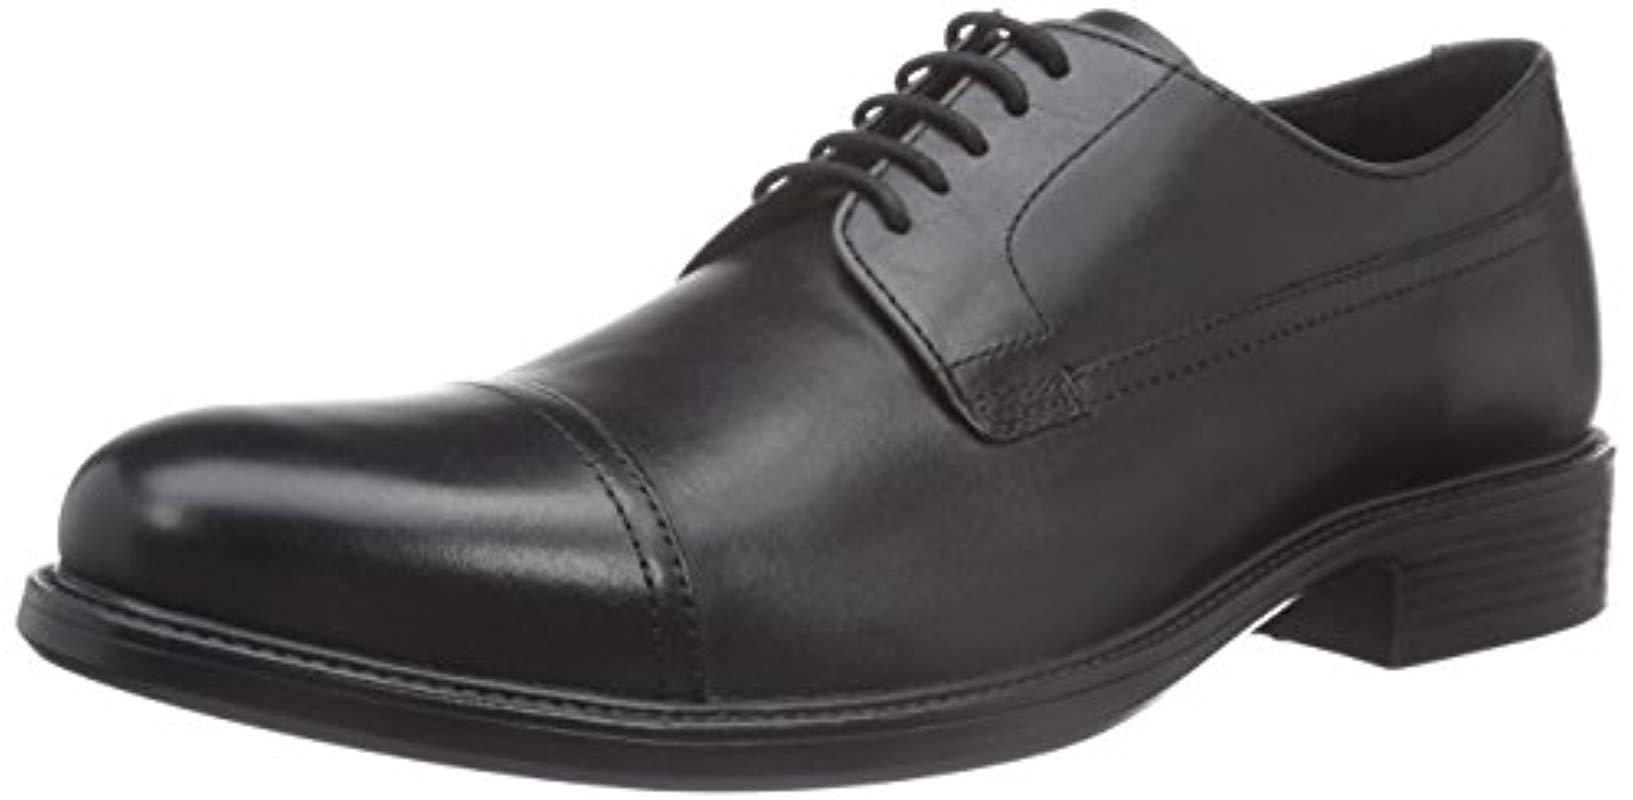 Geox Leather Carnaby 8 Cap Toe Brogue Shoe Oxford in Black for Men ...